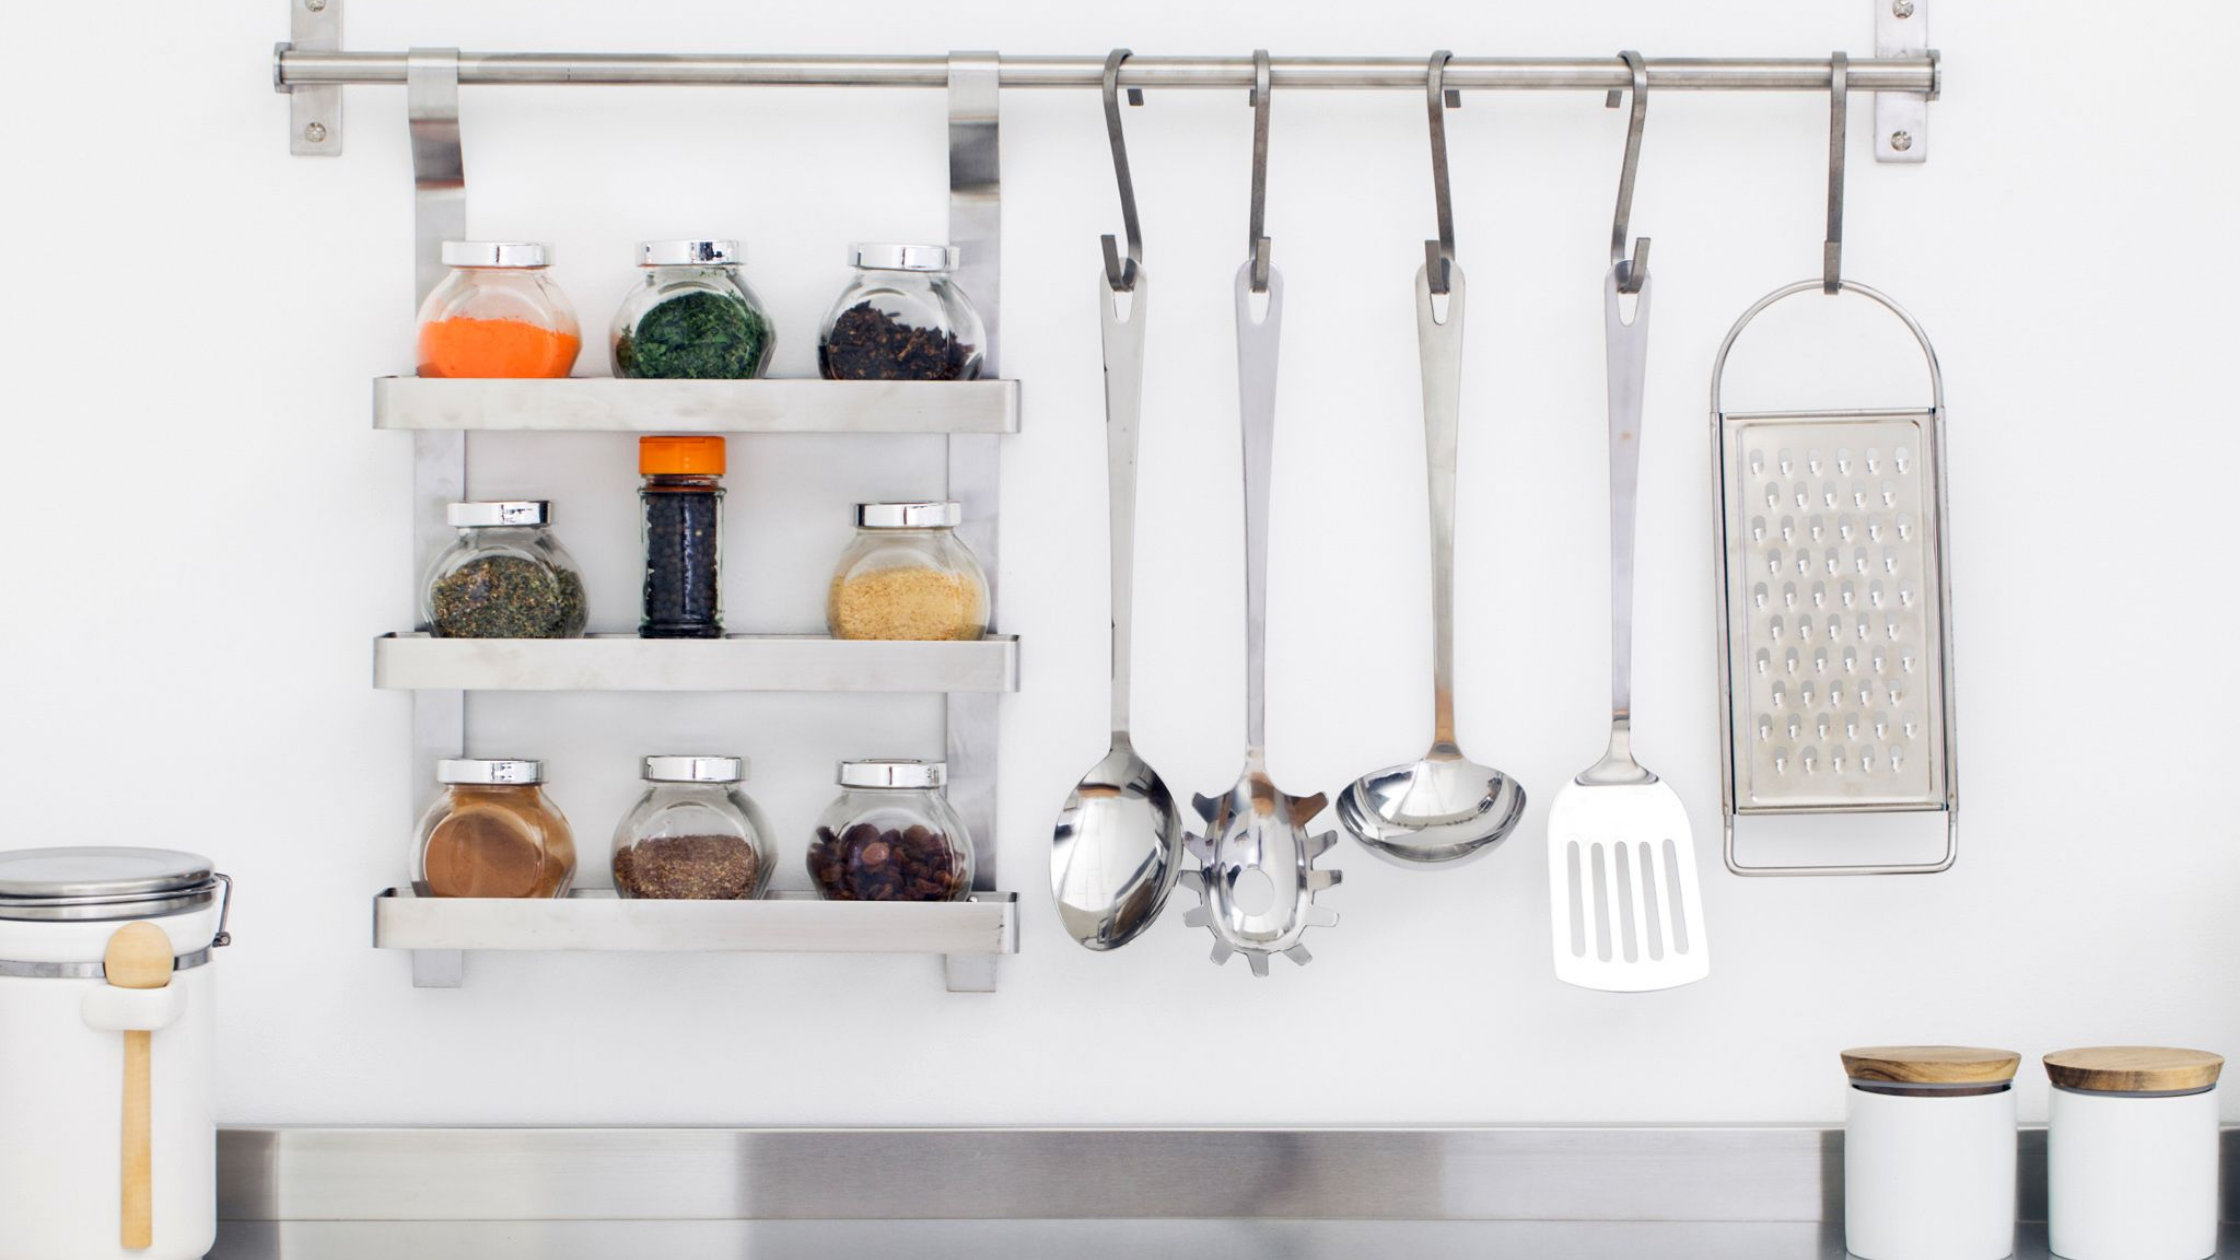 How to choose your kitchen utensils for traditional and modern cooking.